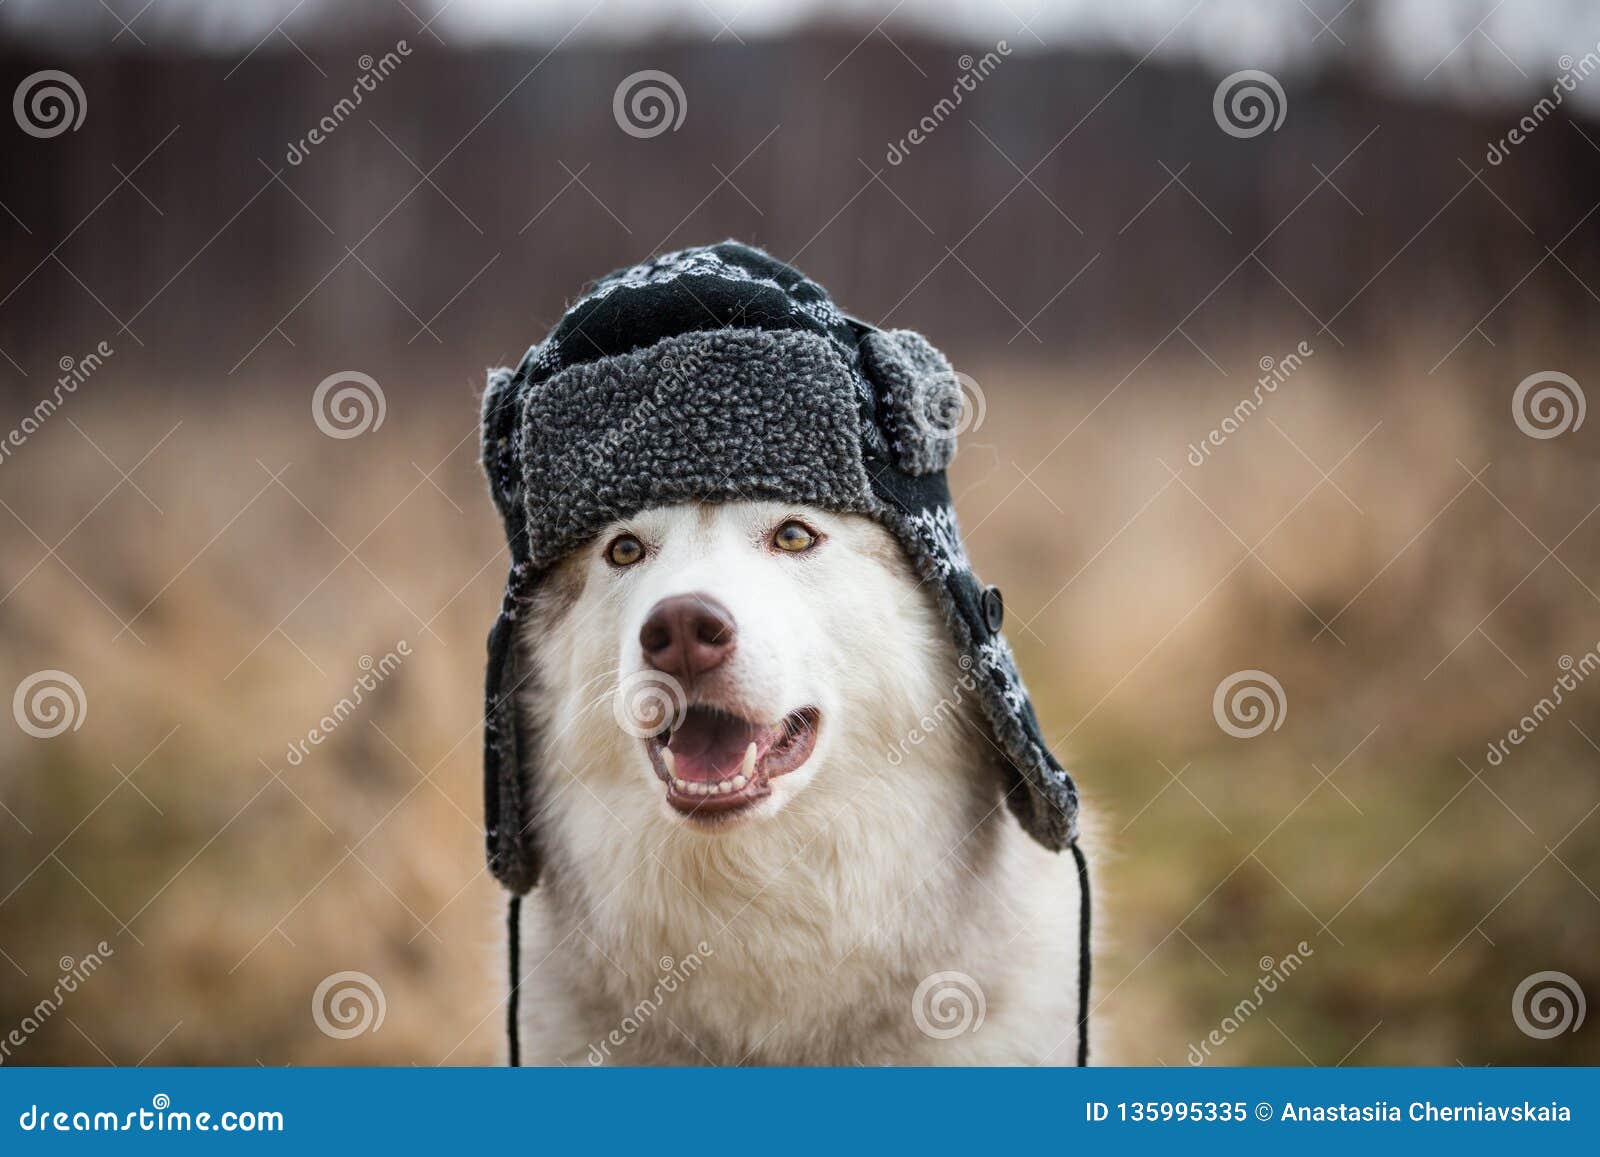 Cute Siberian Husky Dog is in Warm Cap with Ear Flaps. Close-up Image of  Funny Dog in Russian Style Stock Image - Image of fluffy, canine: 135995335